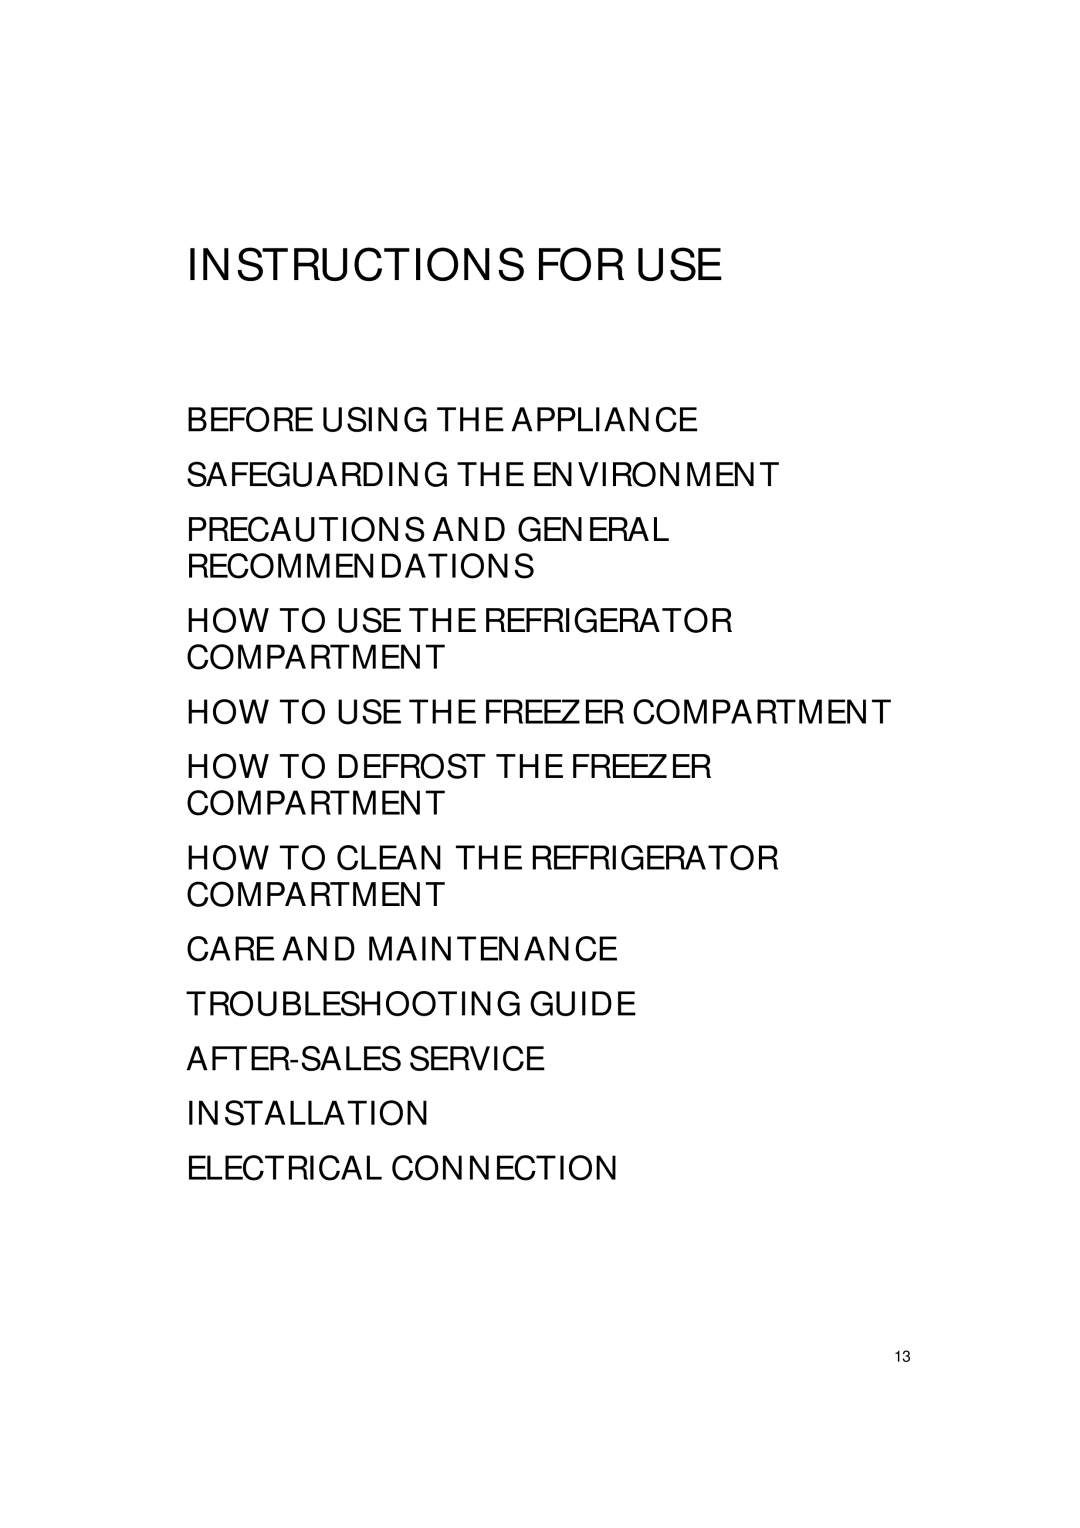 Smeg CR5050A manual Before Using The Appliance Safeguarding The Environment, Precautions And General Recommendations 